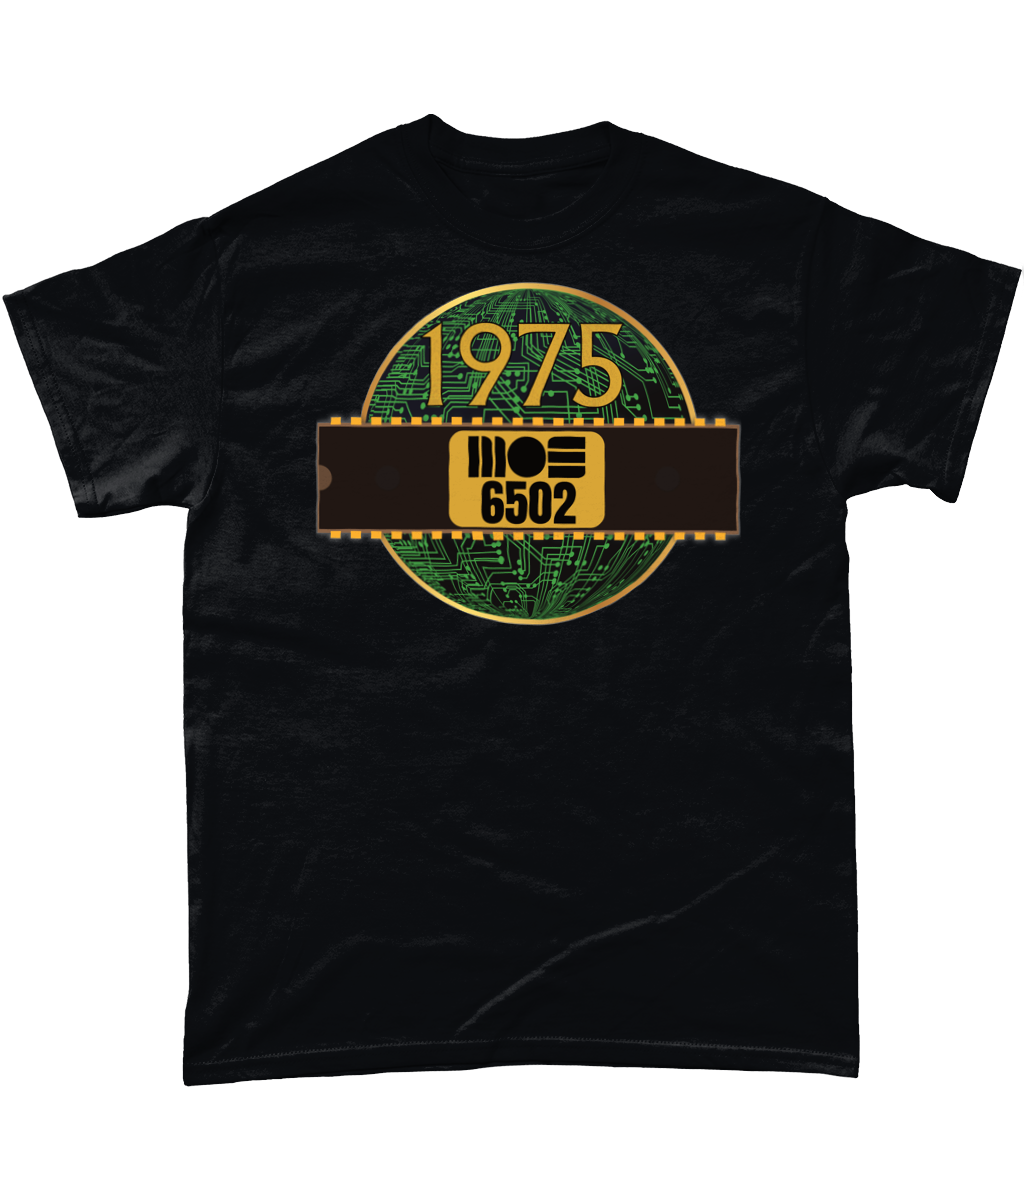 1975 MOS 6502 Cpu/Processor T-Shirt, Black T-shirt with a gold circle with a basic representation of a circuit board in green and a 40 pin chip across the front with MOS 6502 and 1975 written on it.